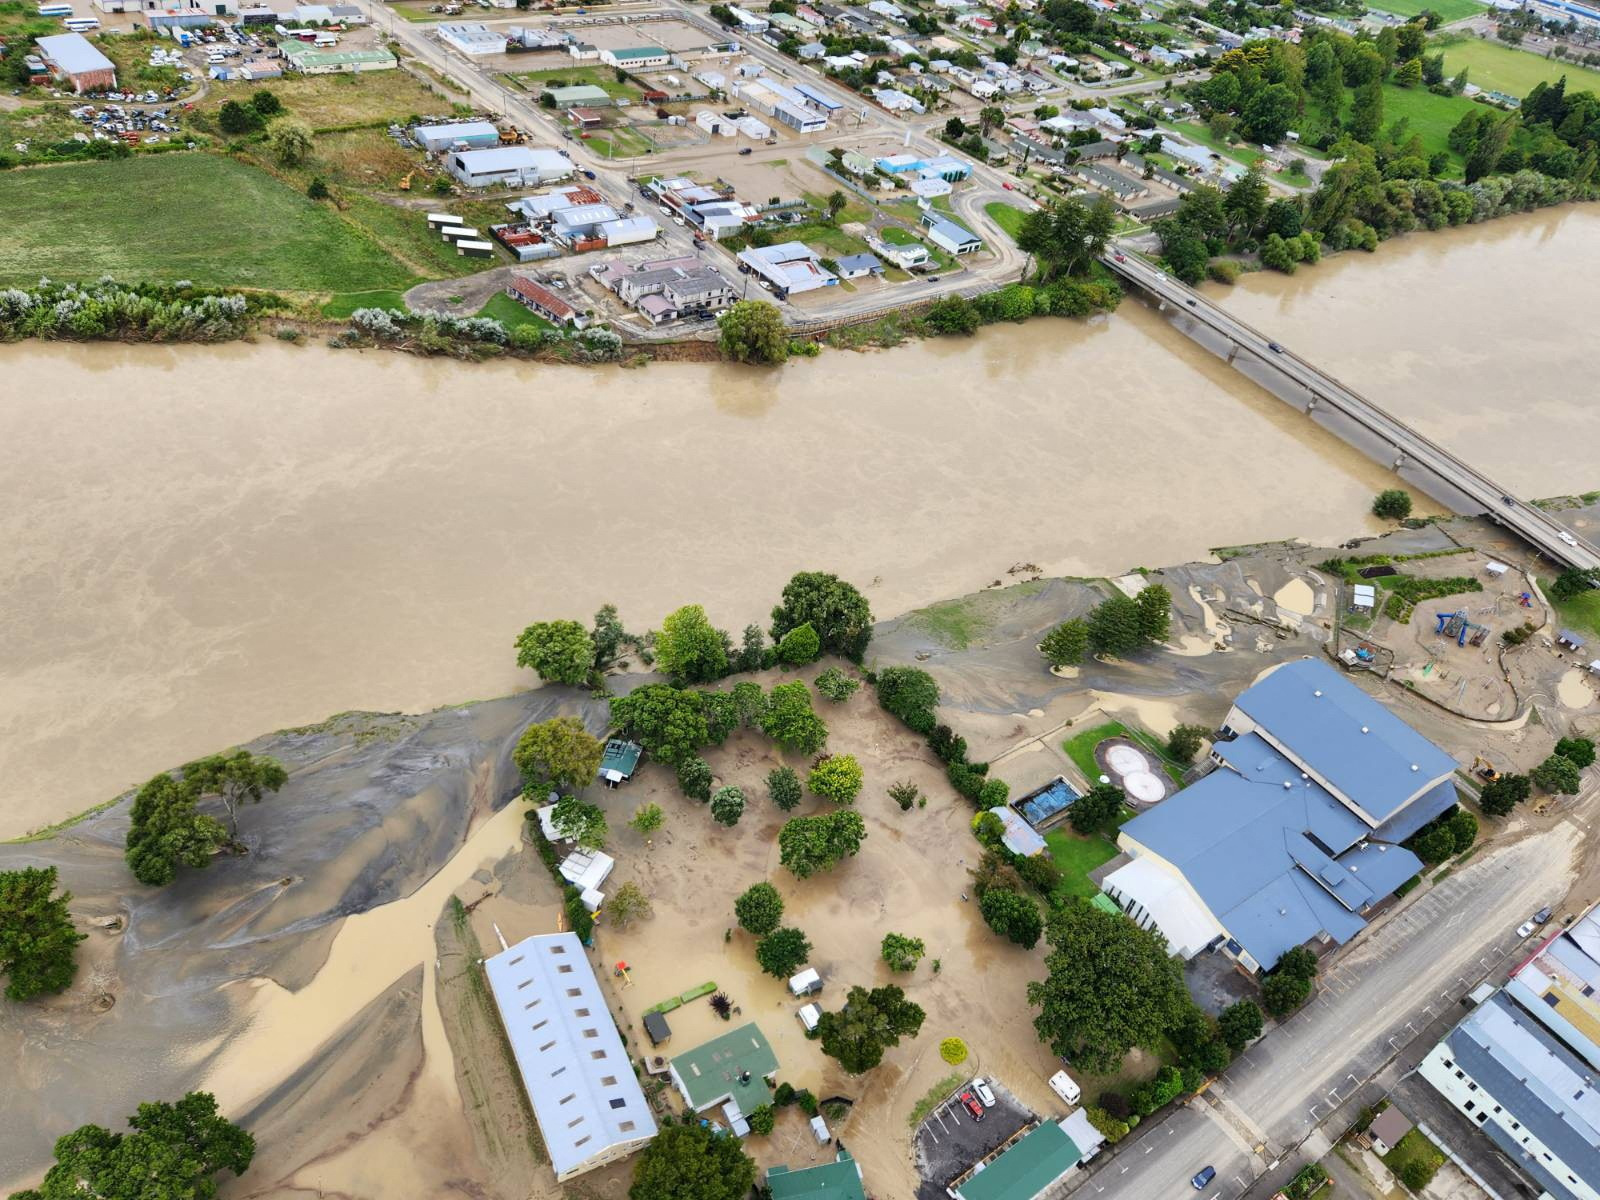 13 still missing after Cyclone Gabrielle in New Zealand Inquirer News